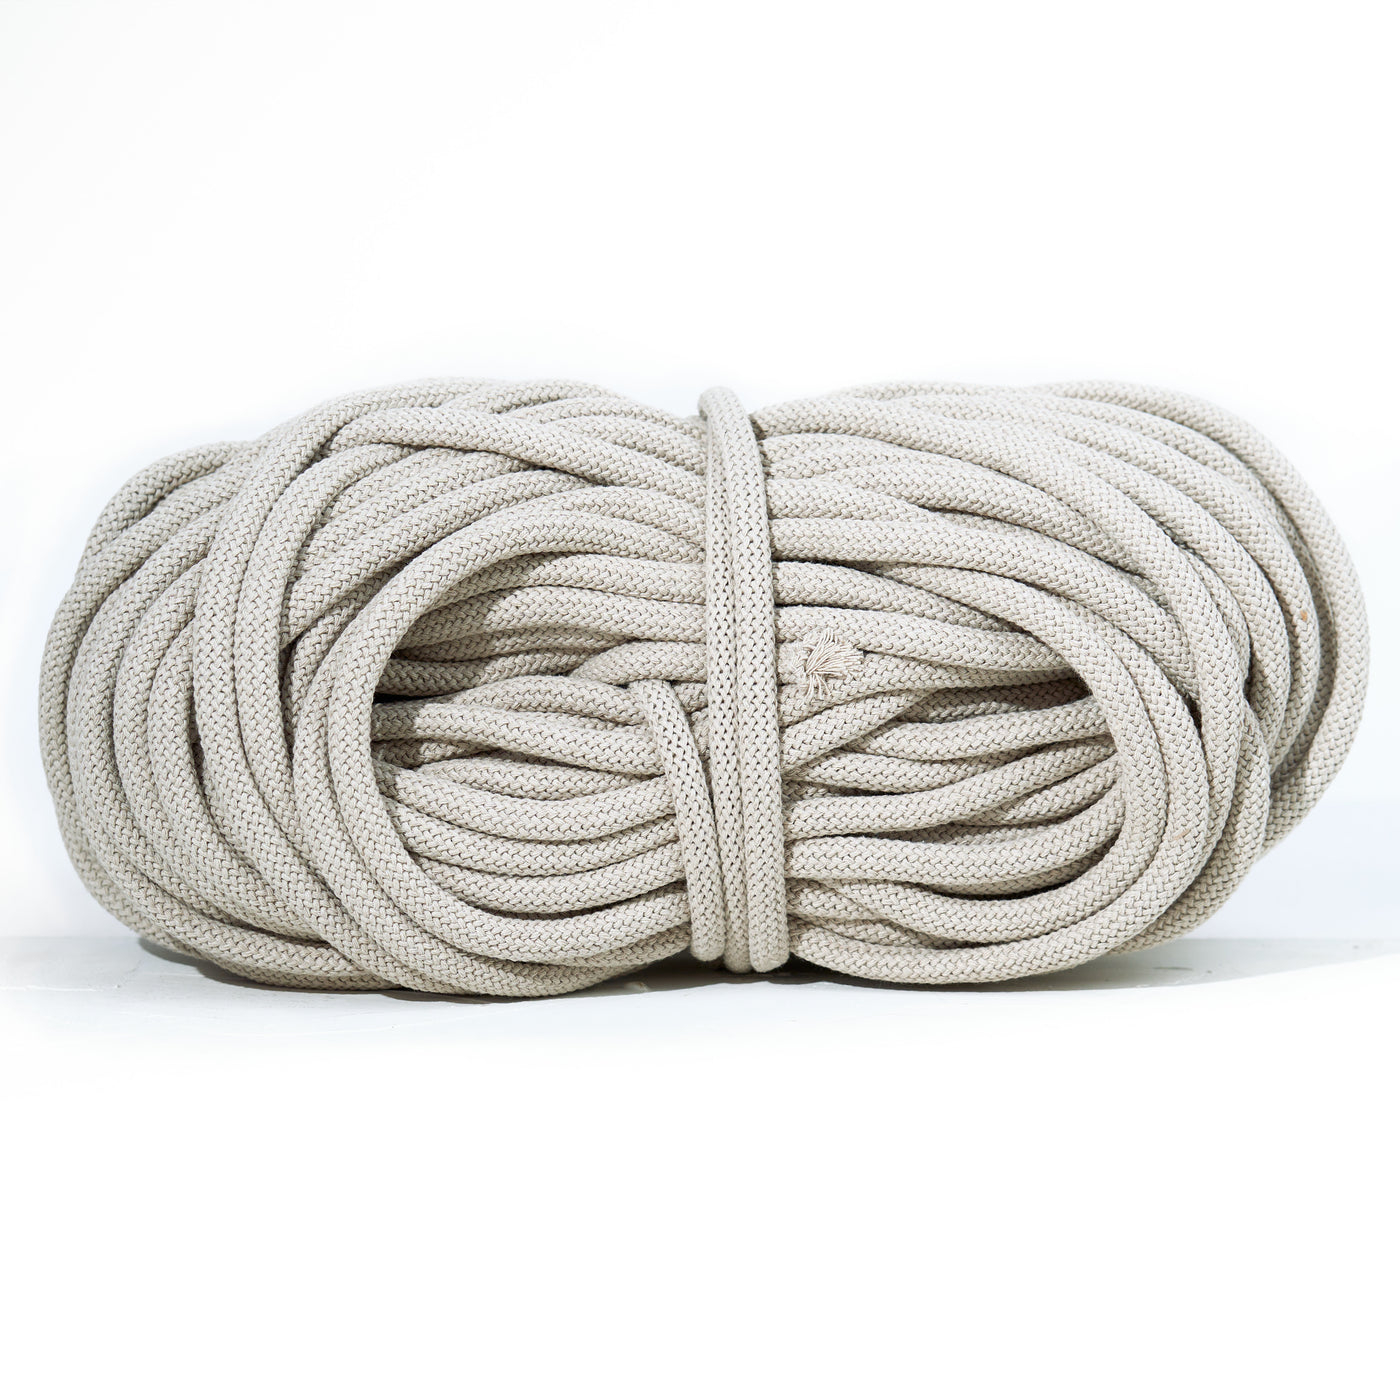 Braided Recycled Cotton Cord 9mm - Moon